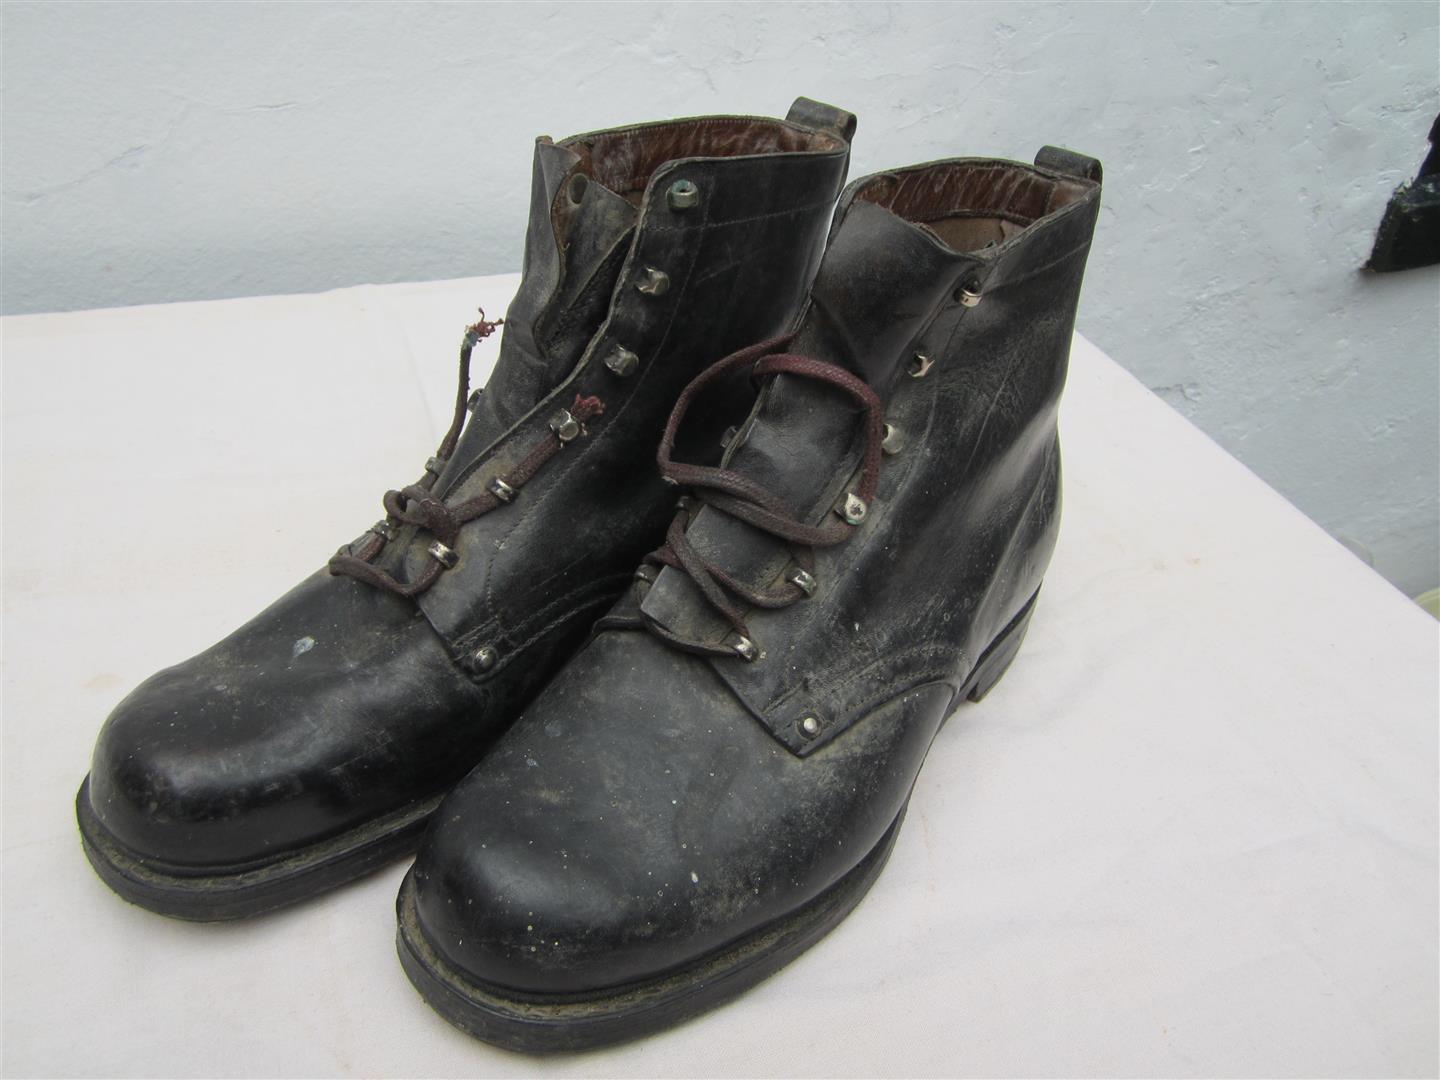 WW2 WH Ankle Boots, 1944